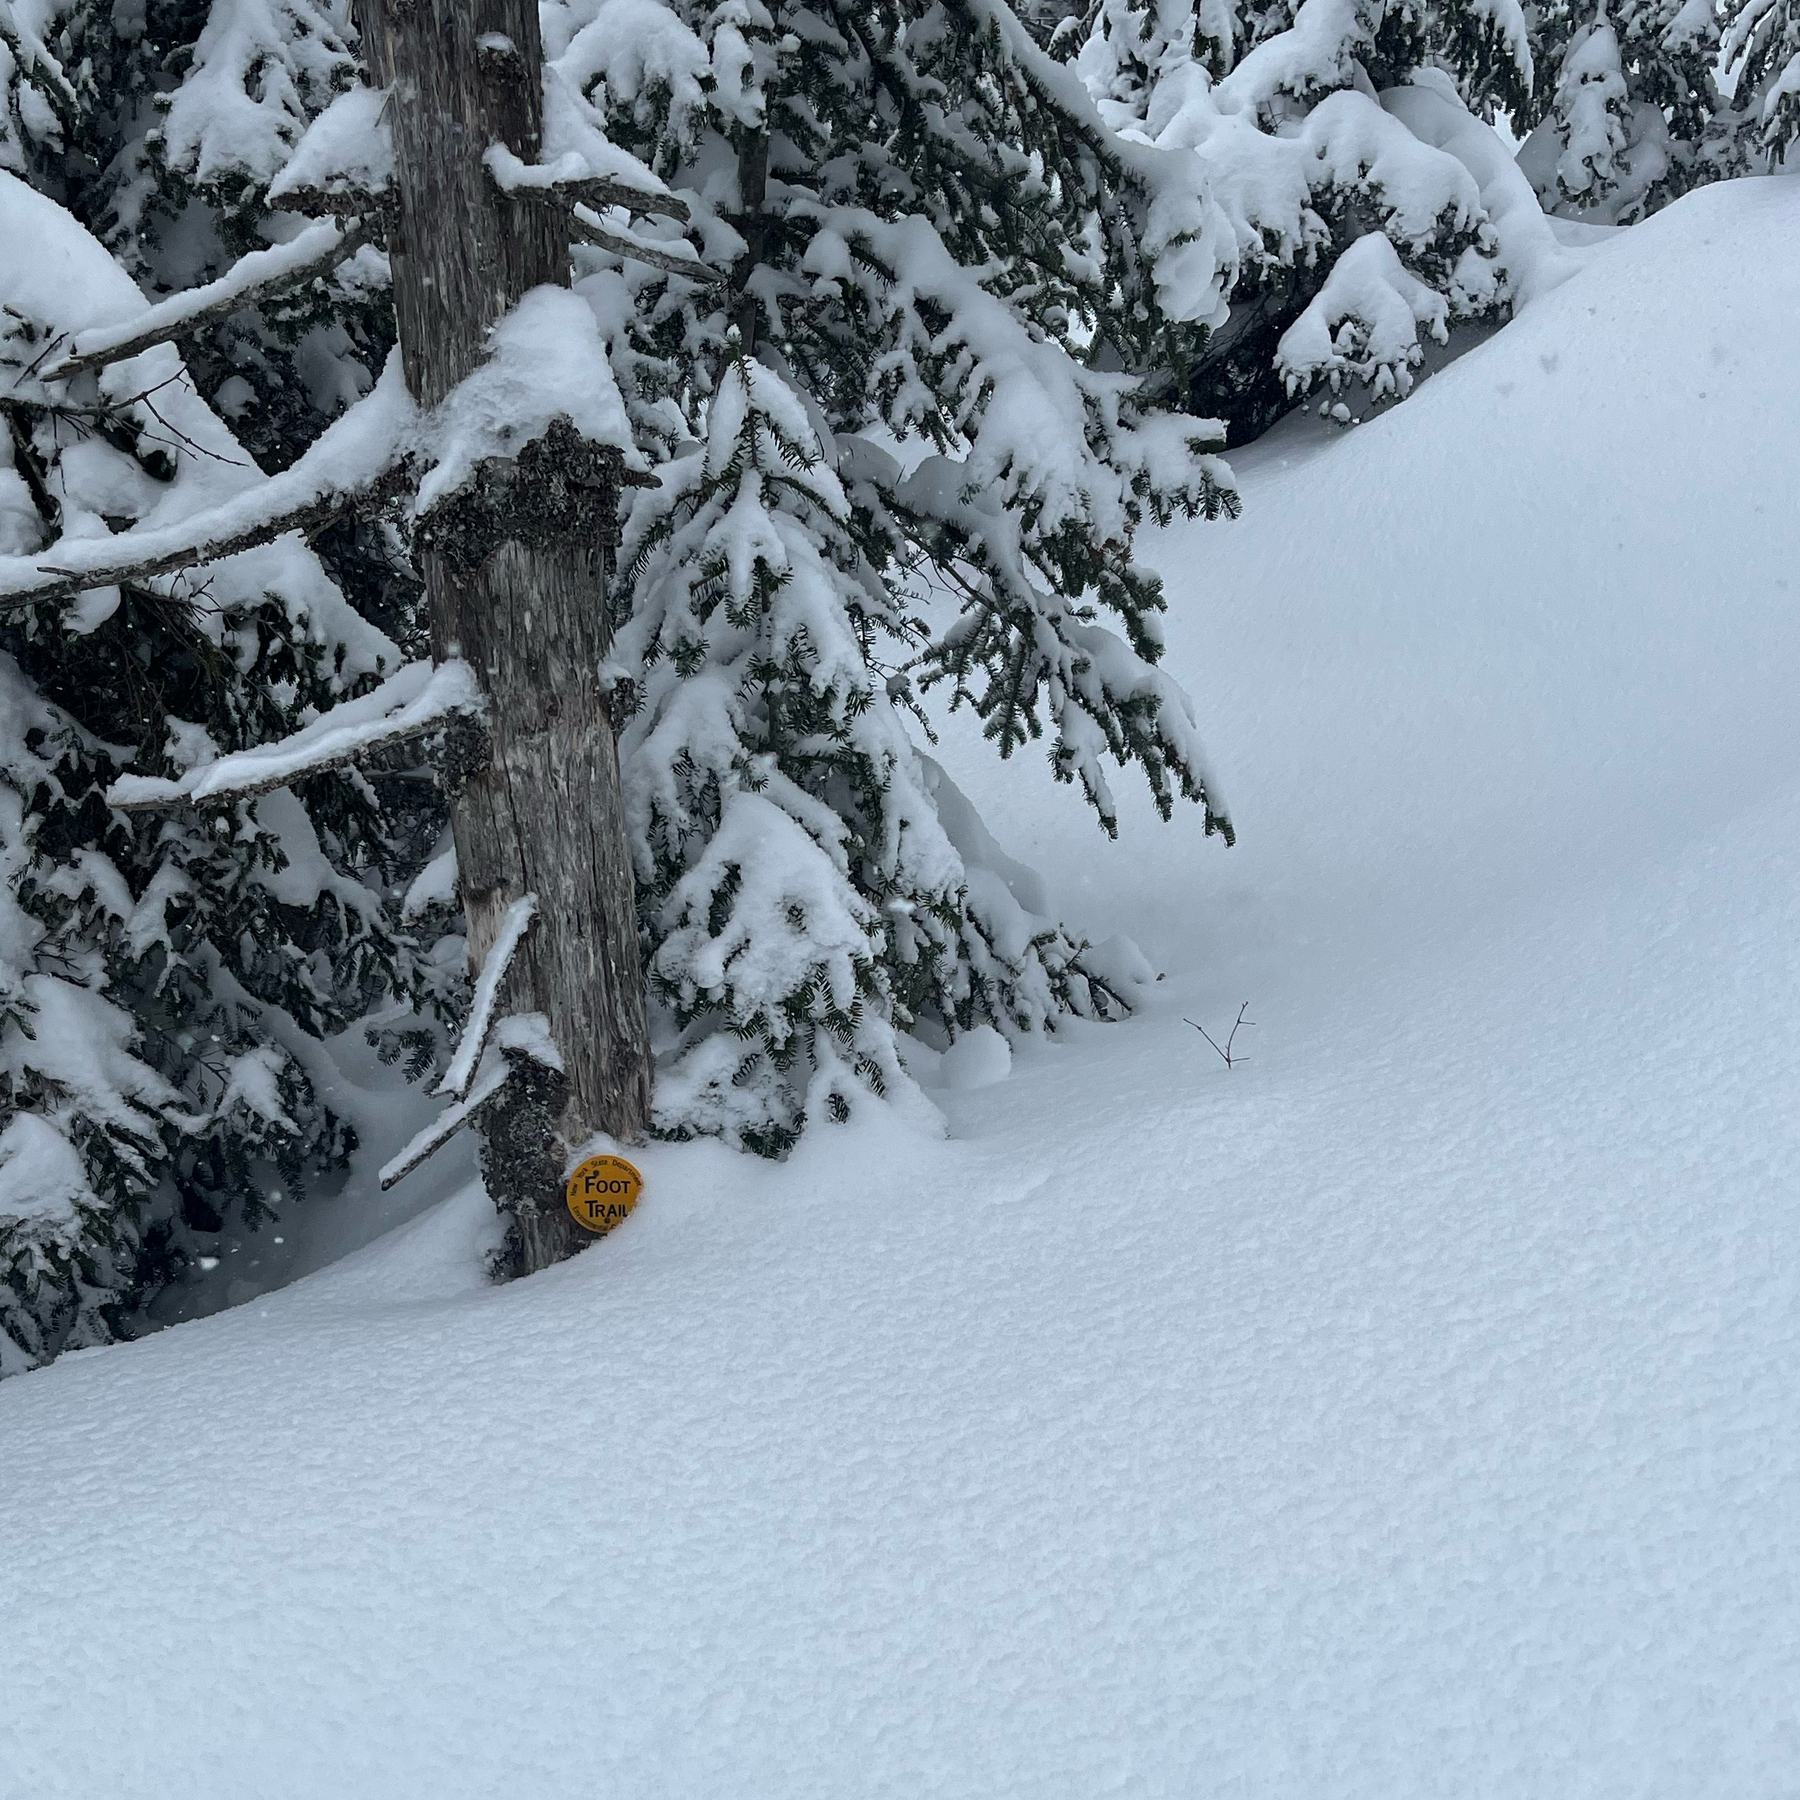 A tree with a “foot trail” marker nearly covered in snow.